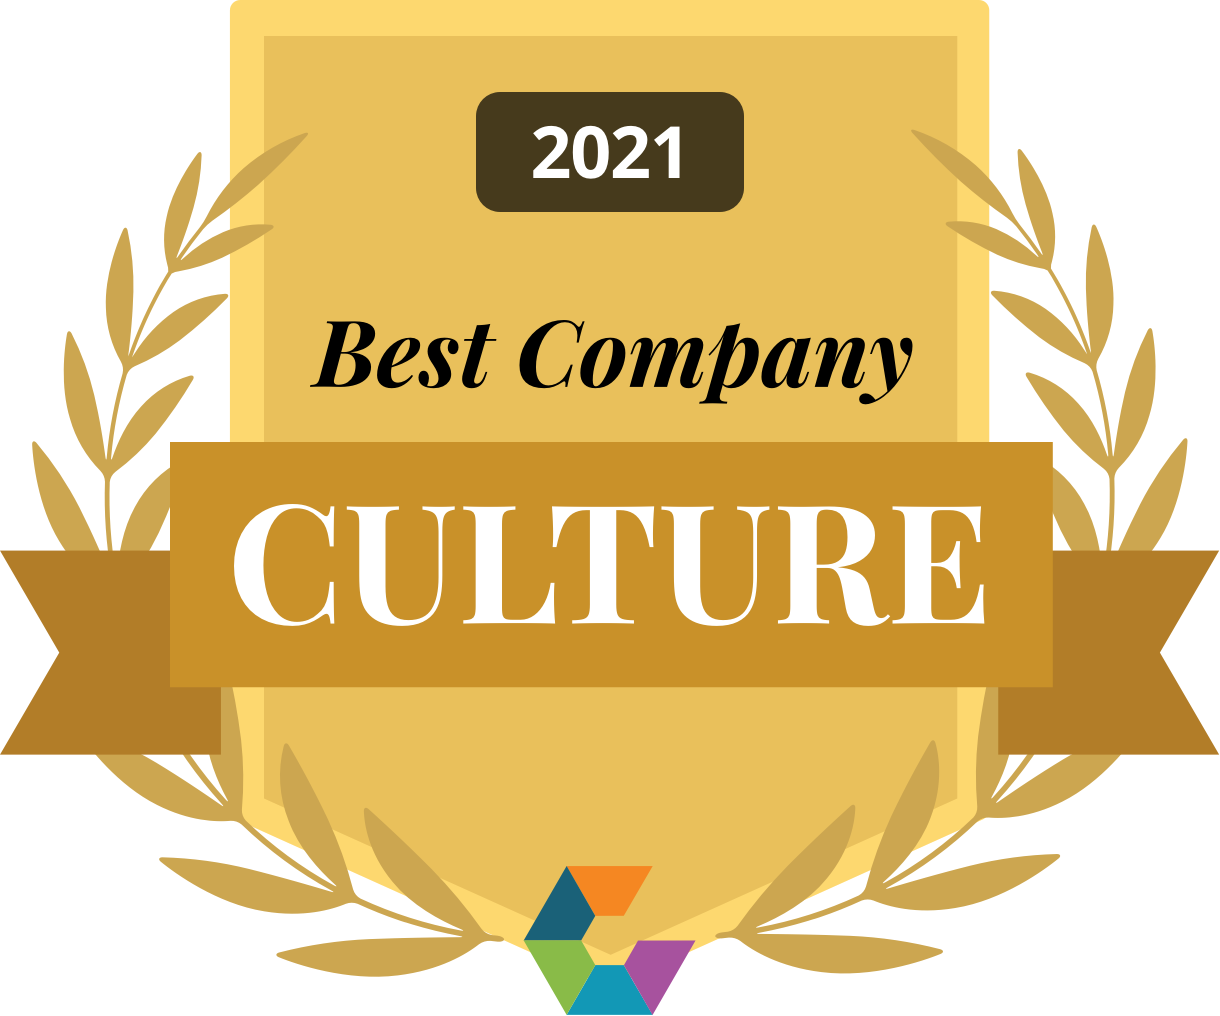 2021 Best Company Culture